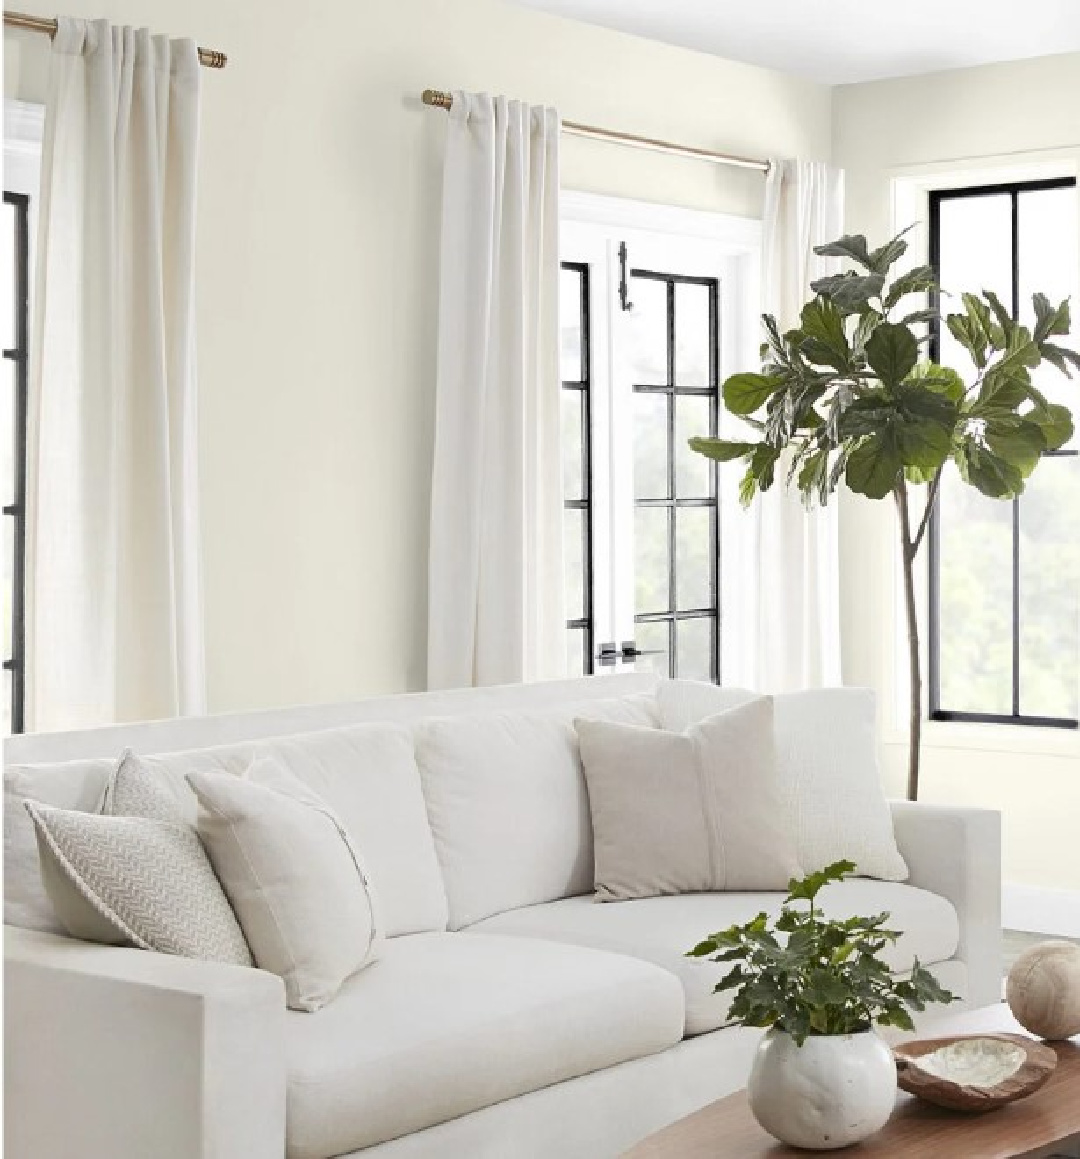 Blank Canvas - BEHR white paint color in a living room. #behrblankcanvas